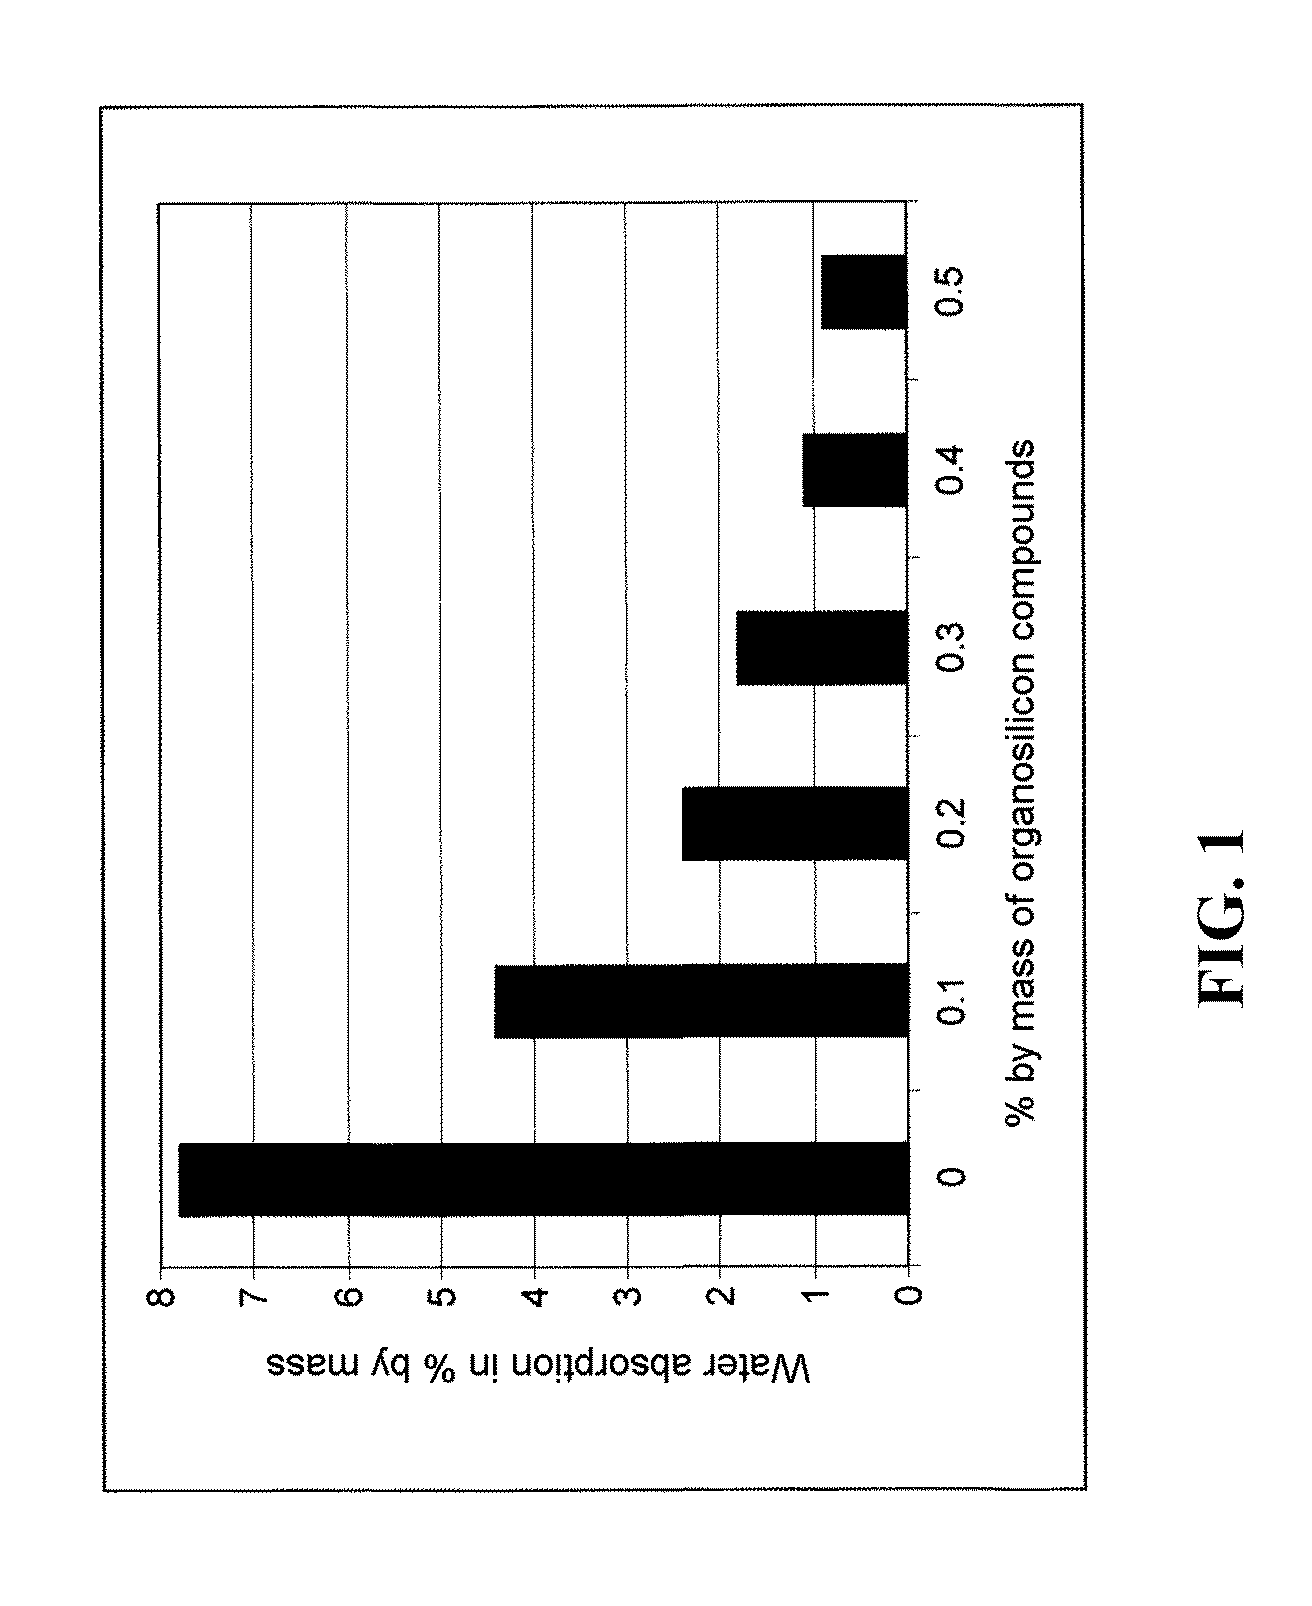 Hydrophobized cement-containing compositions